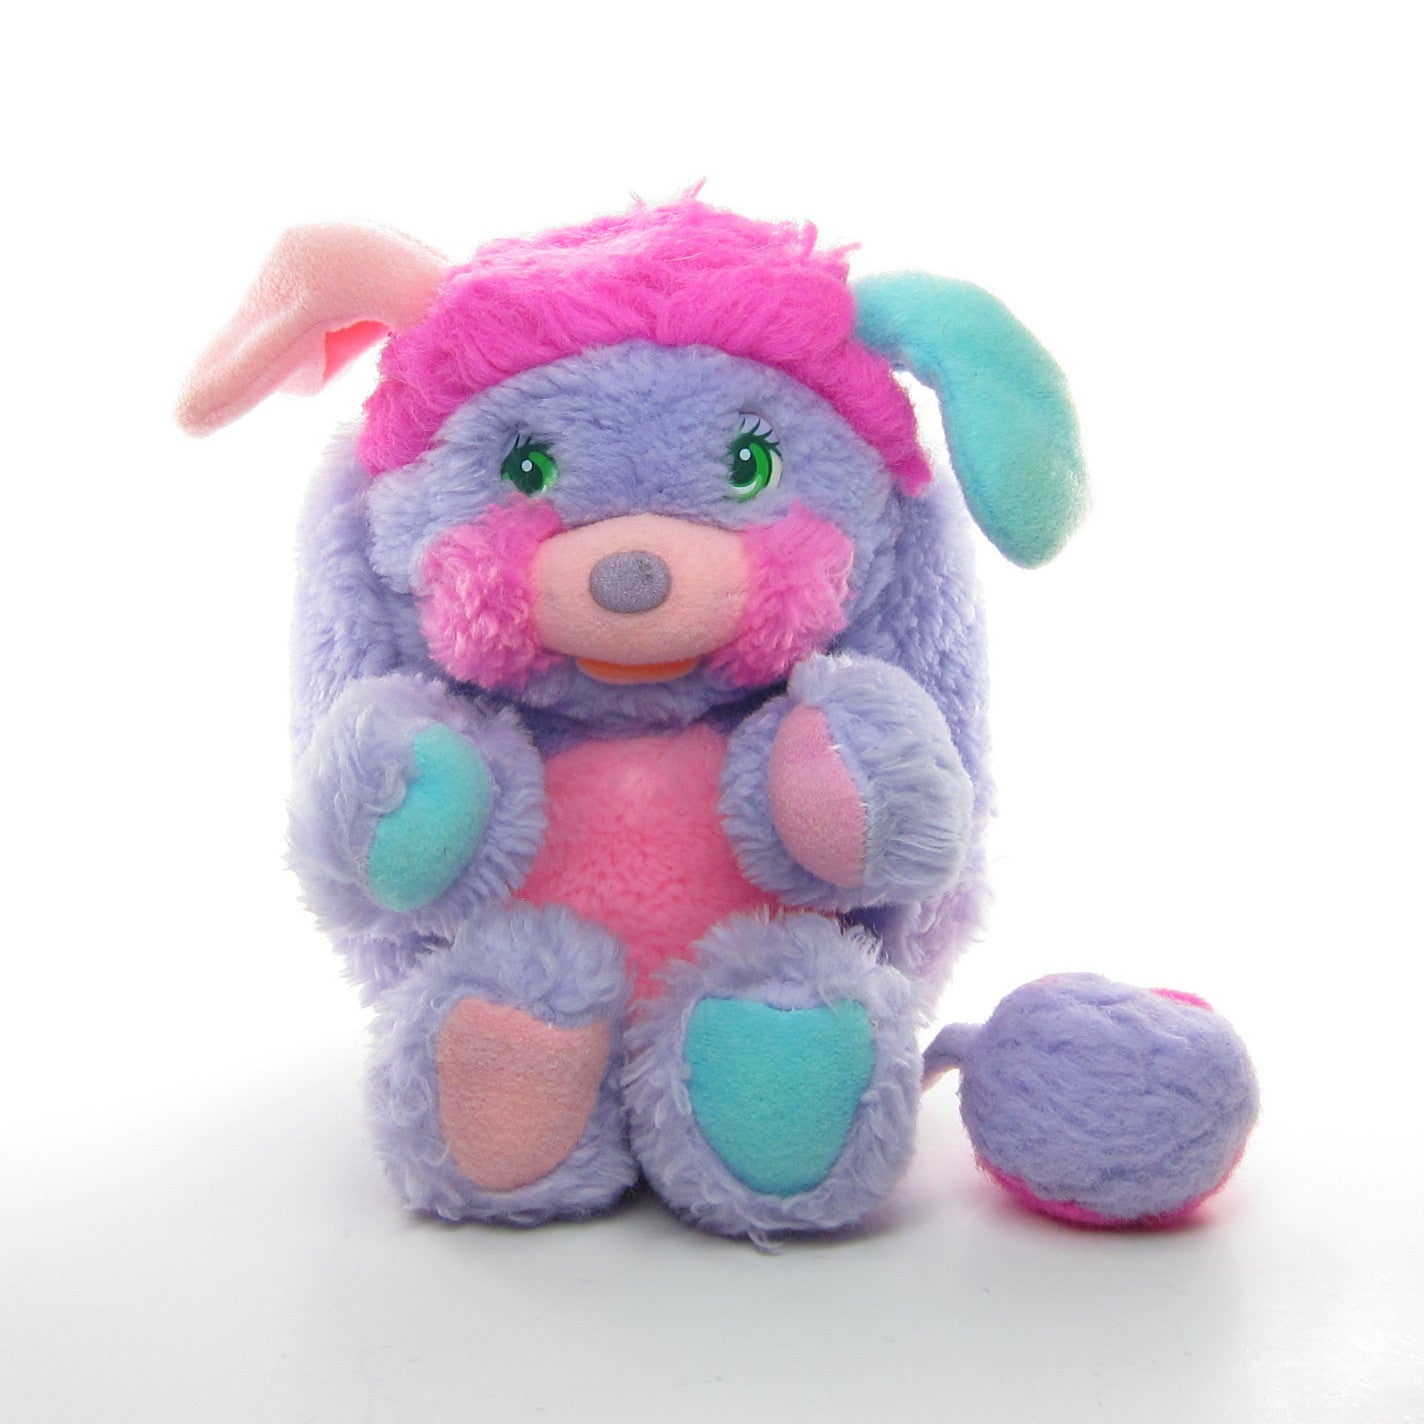 s/ Popples plush character with tag